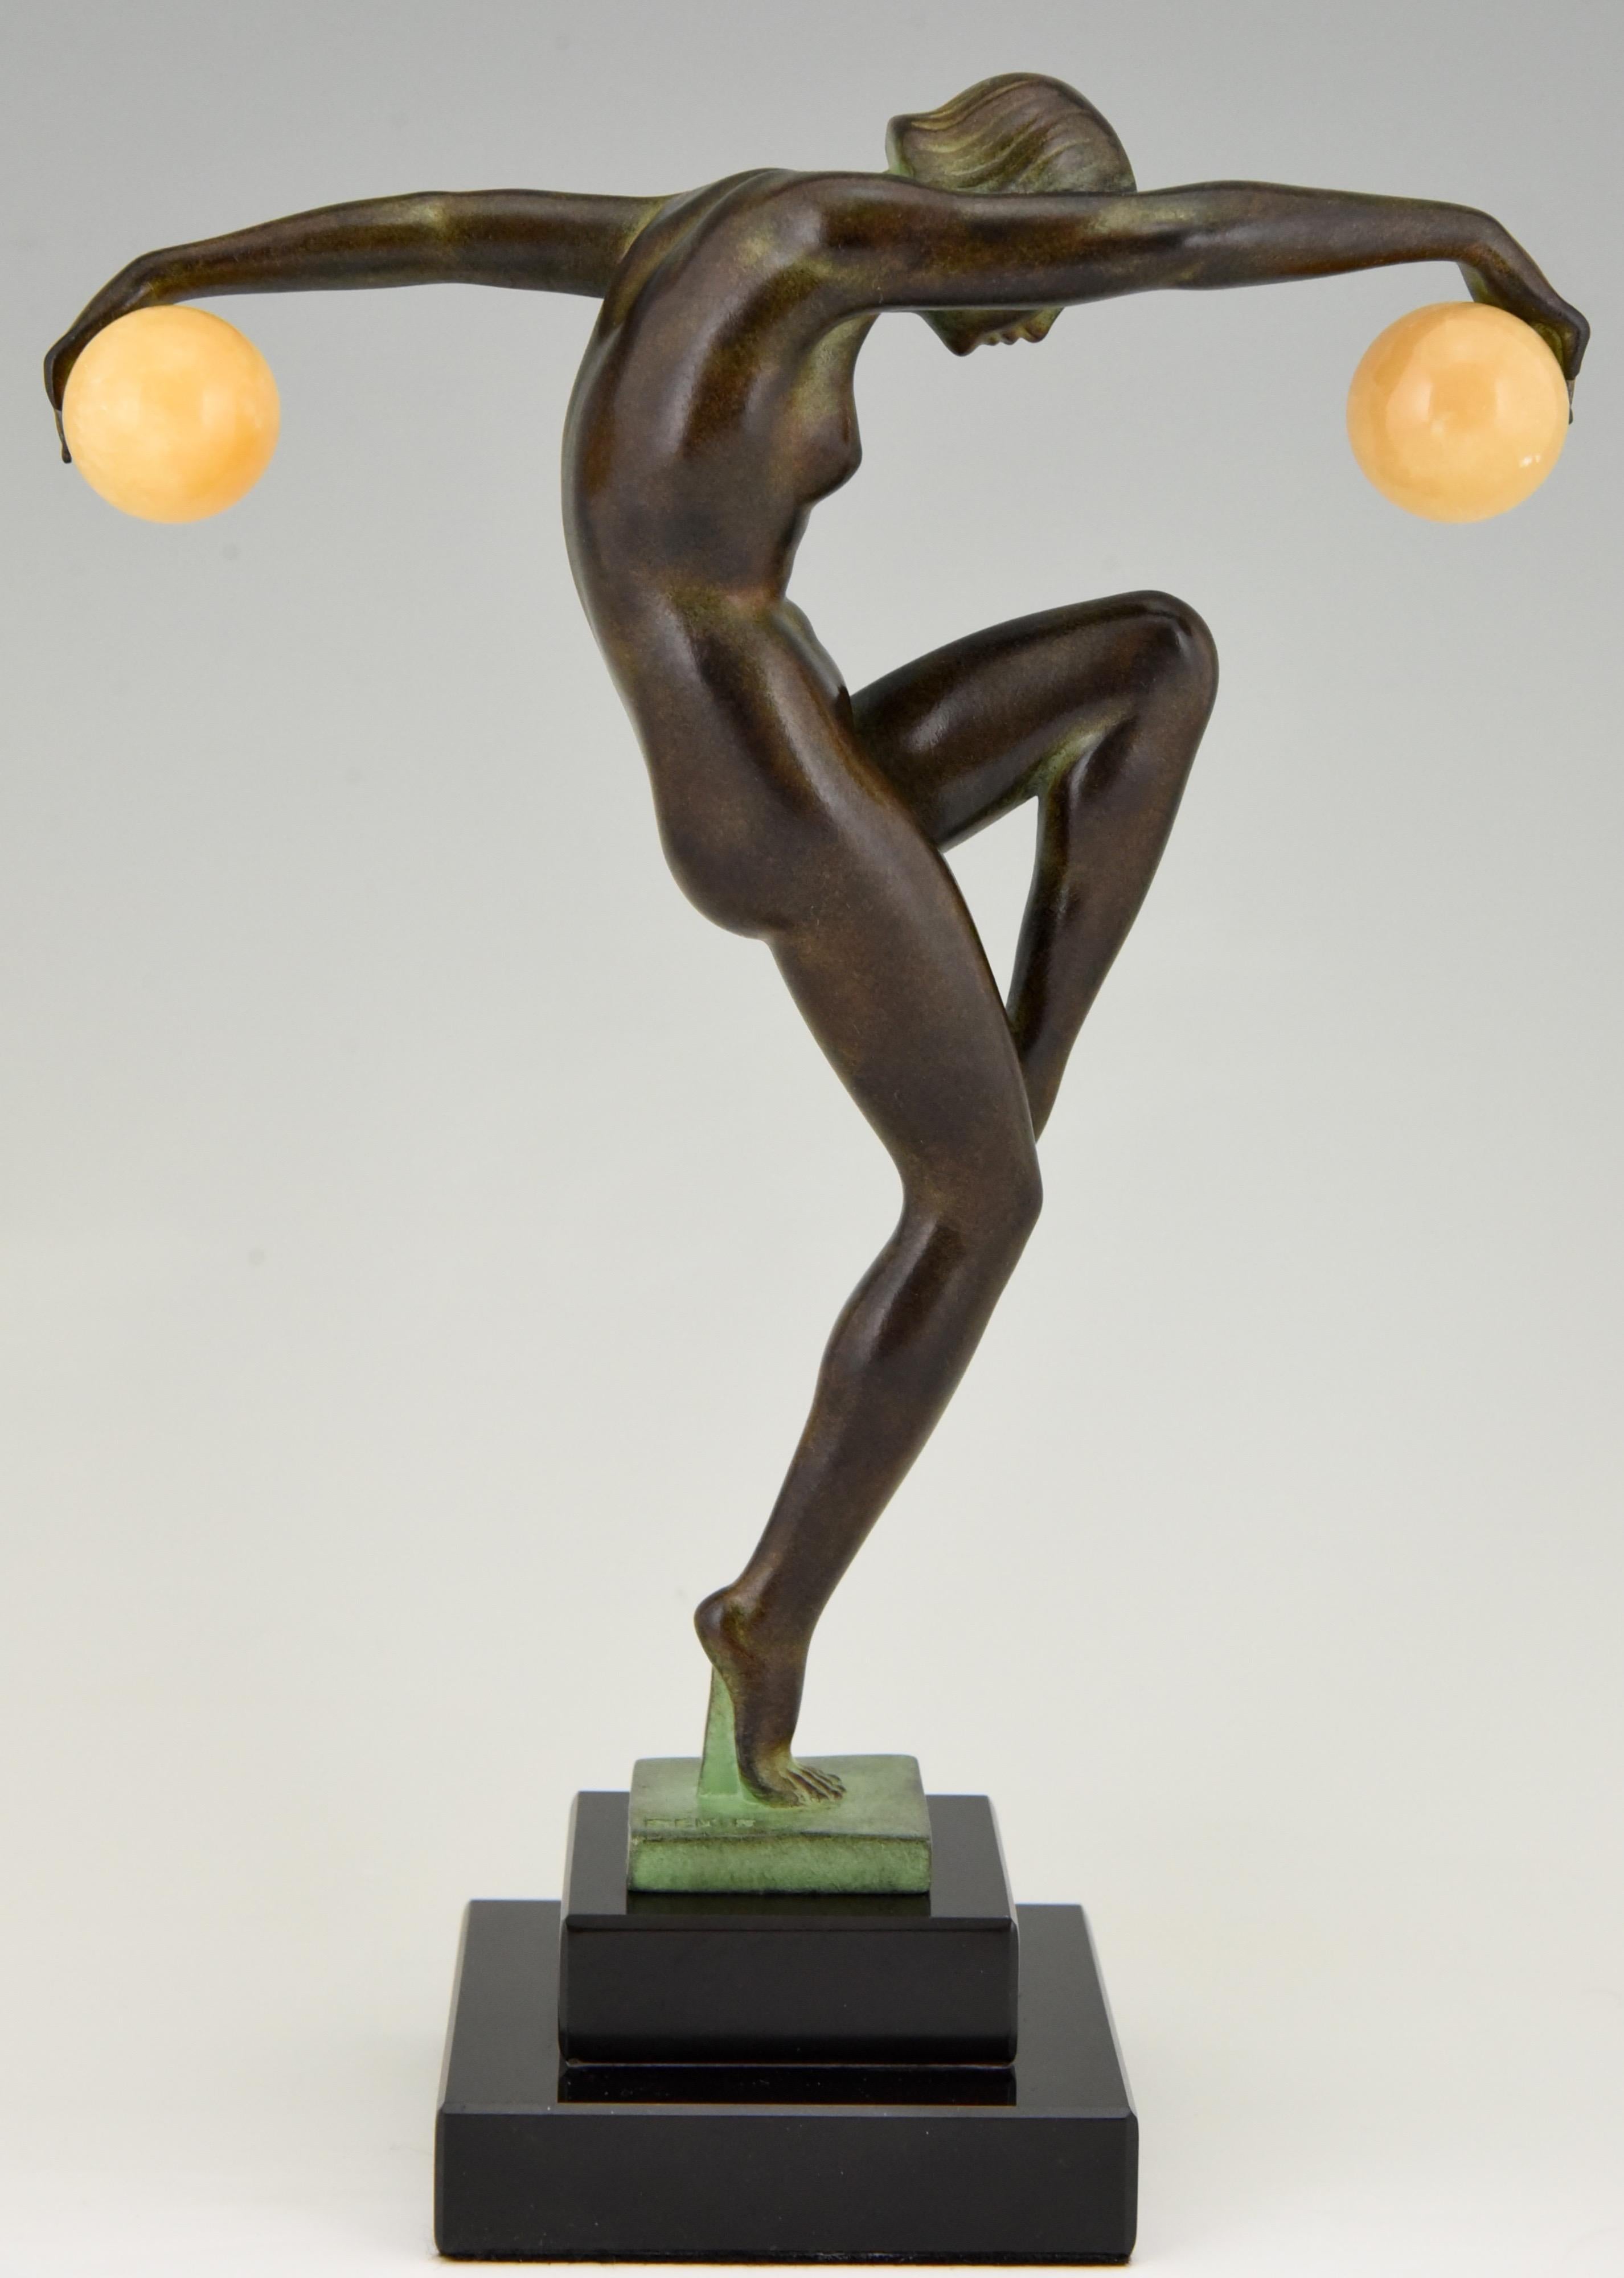 Contemporary Art Deco Style Sculpture Dancing Nude with Balls by Denis for Max Le Verrier